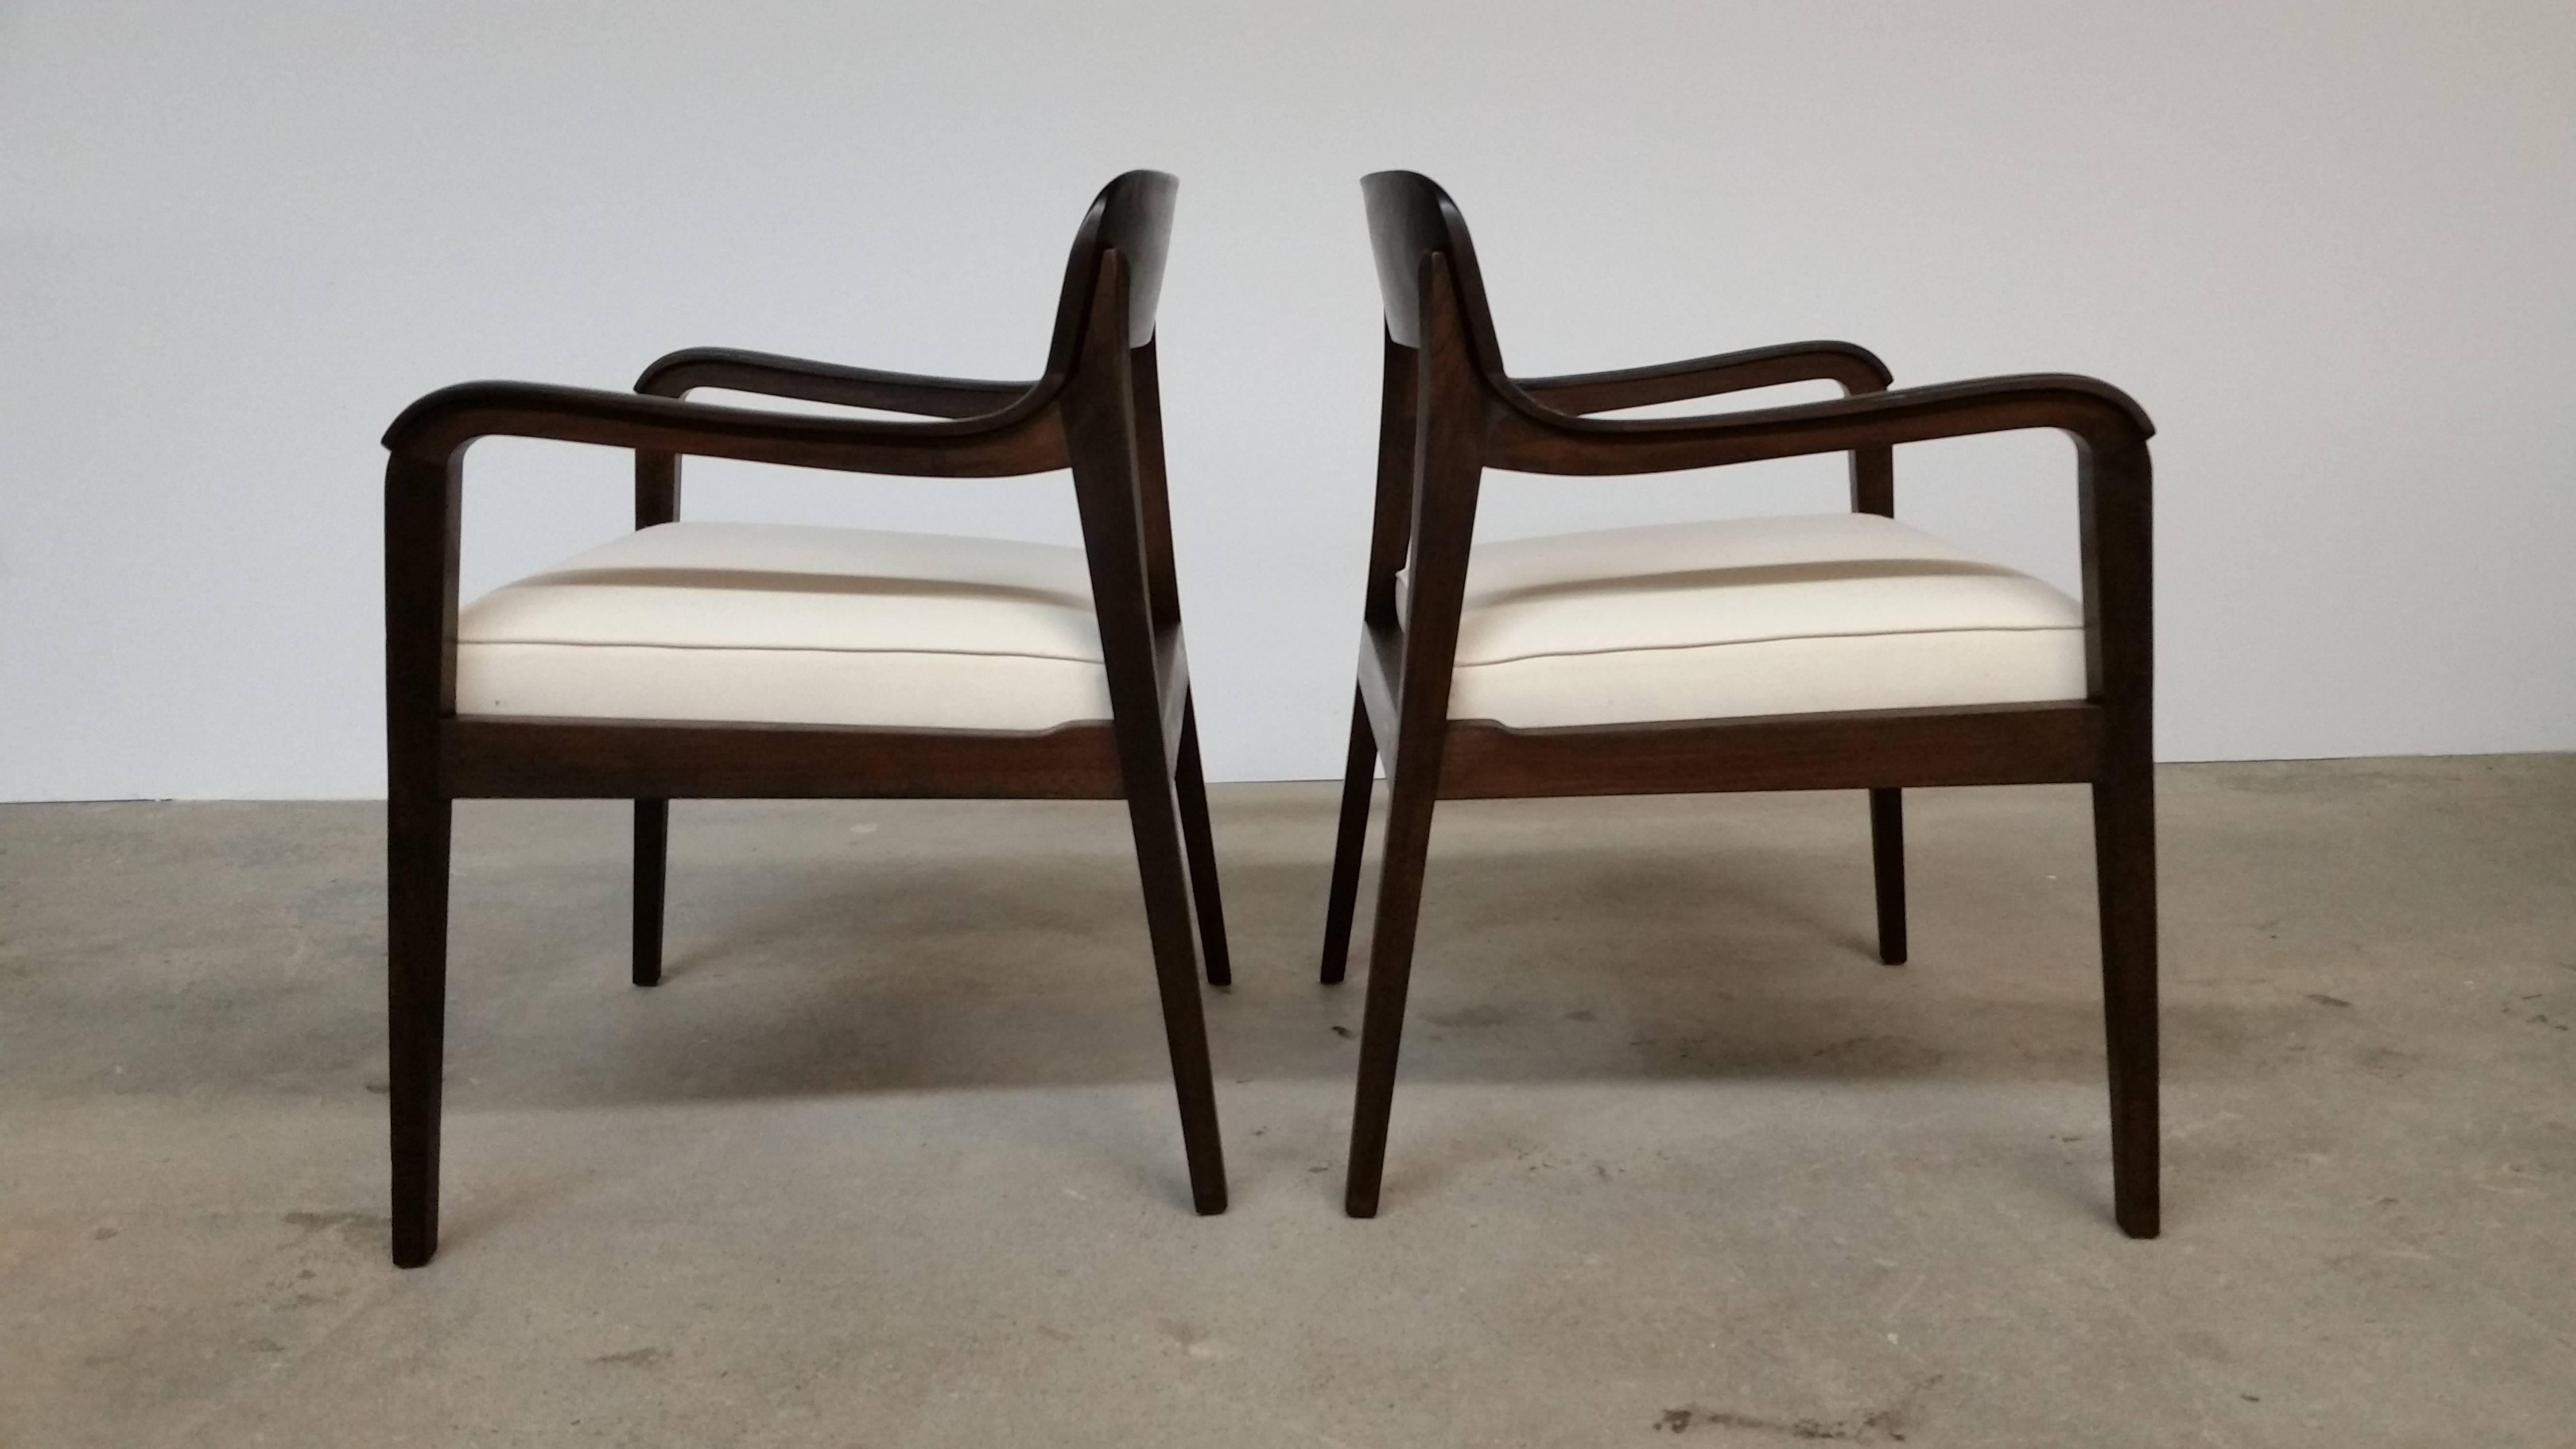 Pair of Riemerschmid chairs, circa 1955, designed by Edward Wormley and produced by Dunbar. Newly reupholstered and refinished. Walnut. 19